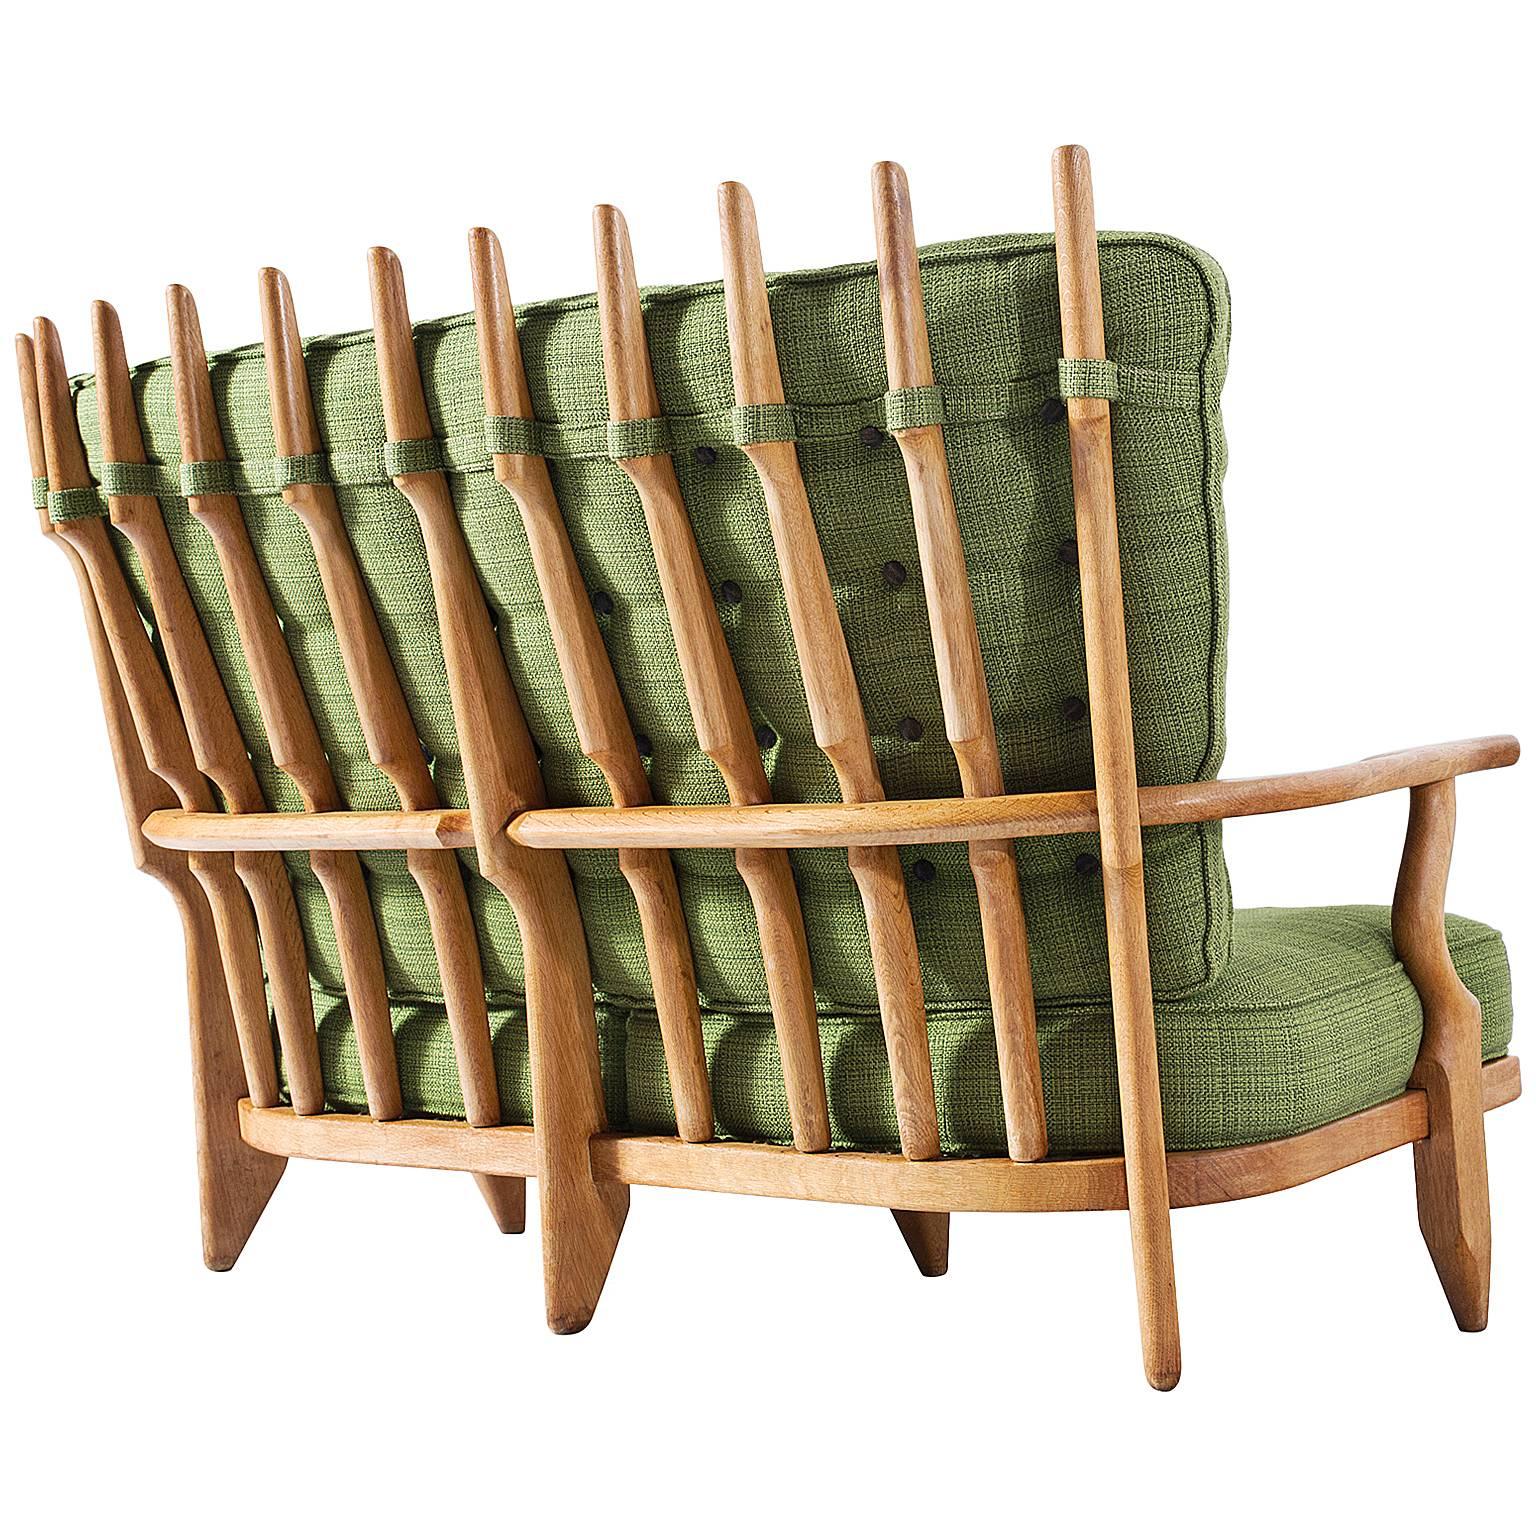 Guillerme et Chambron Solid Oak Sofa with Green Fabric Upholstery